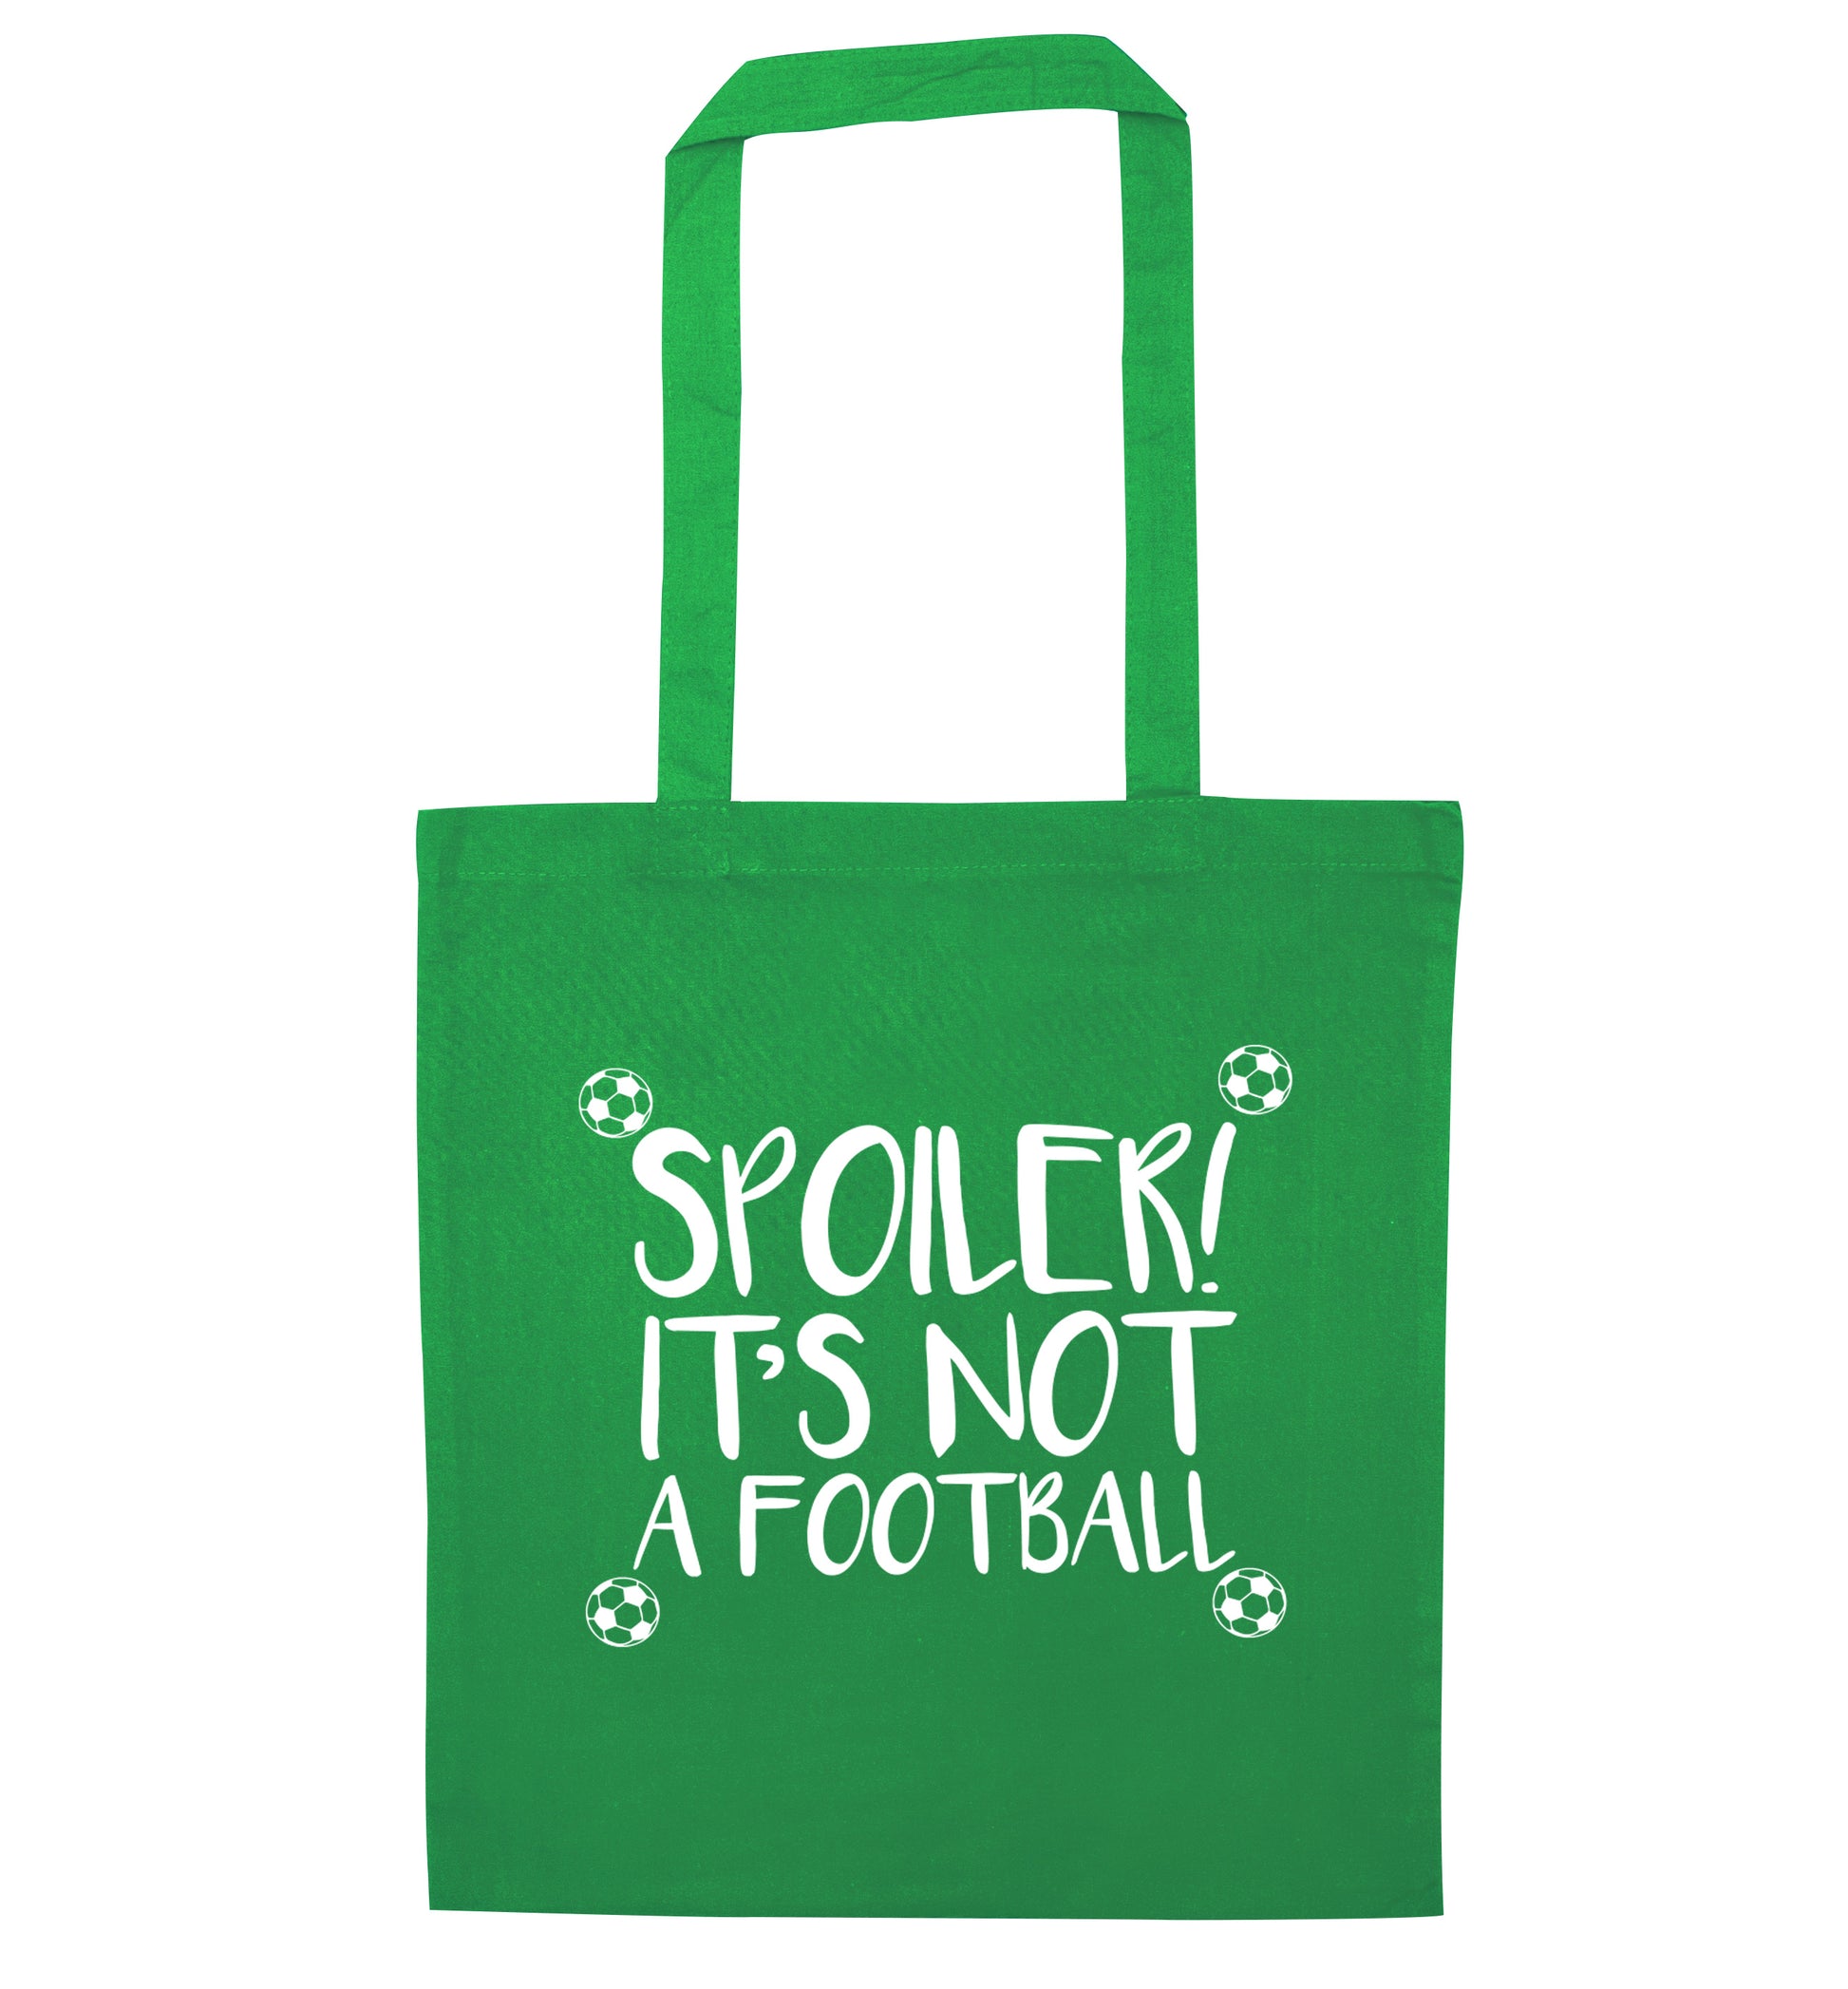 Spoiler it's not a football green tote bag